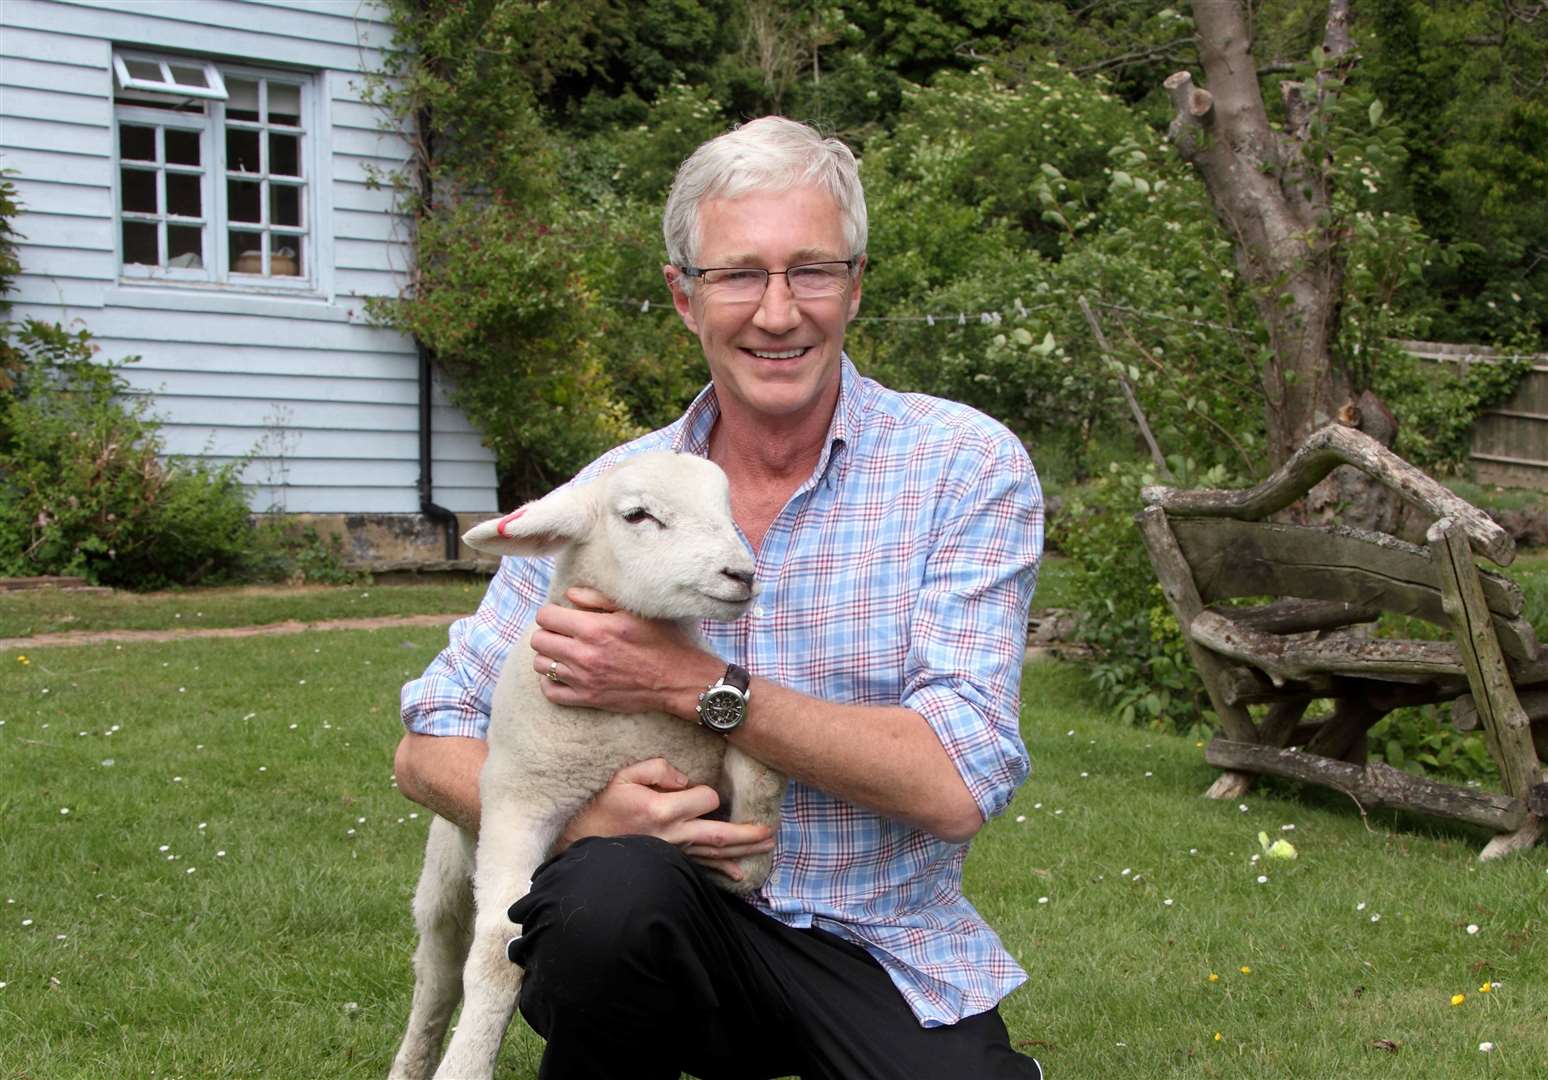 Paul with Winston the lamb